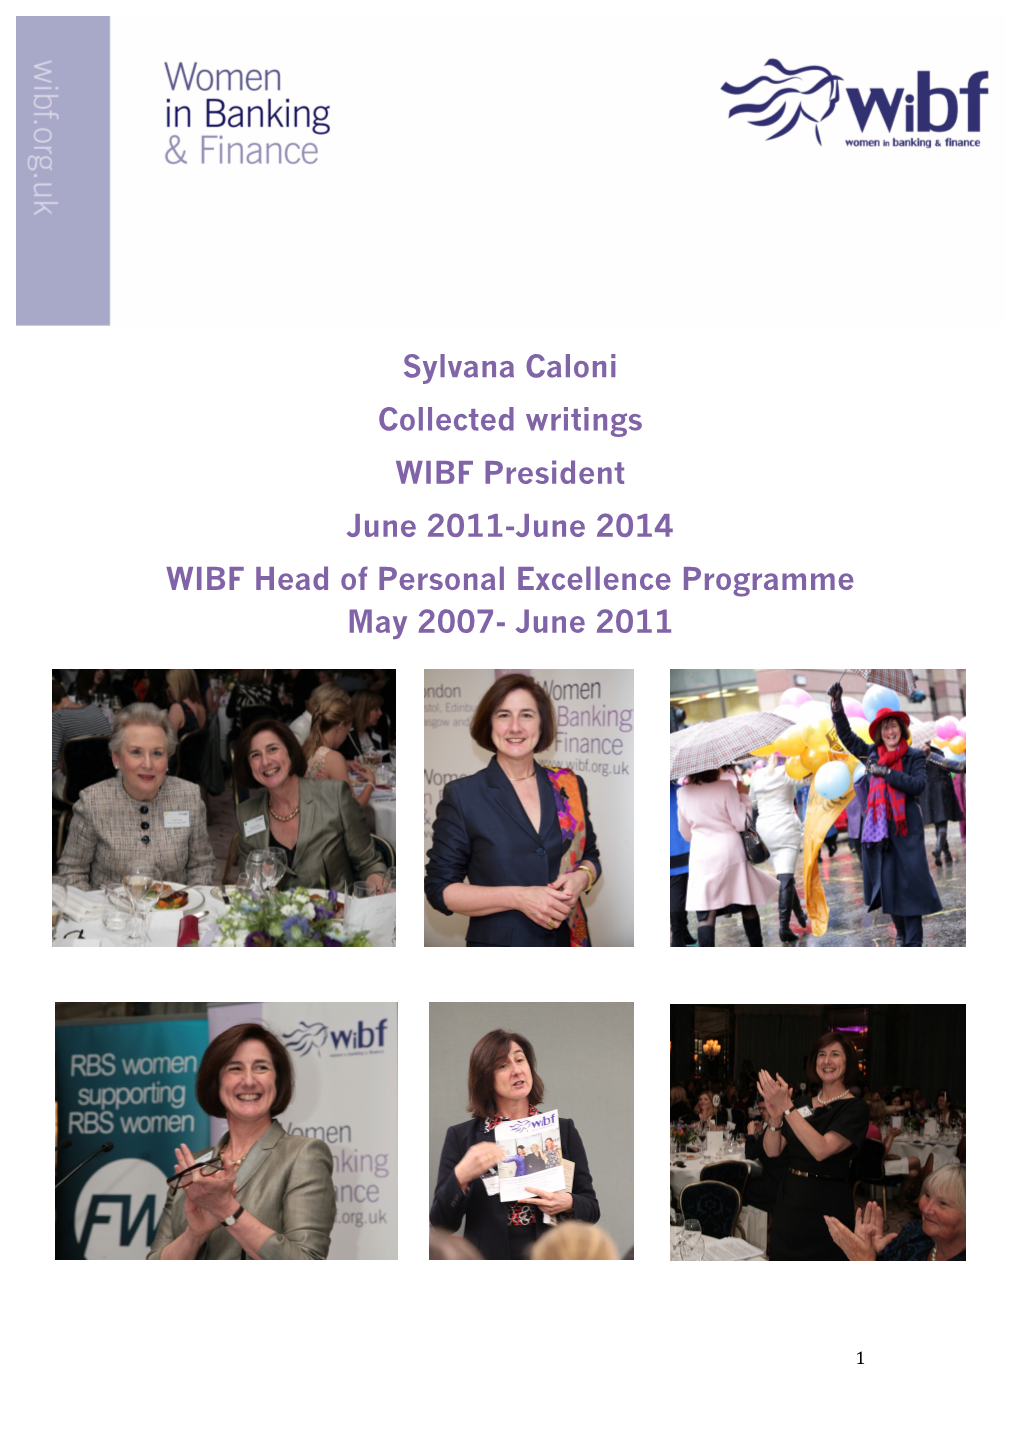 Sylvana Caloni Collected Writings WIBF President June 2011-June 2014 WIBF Head of Personal Excellence Programme May 2007- June 2011